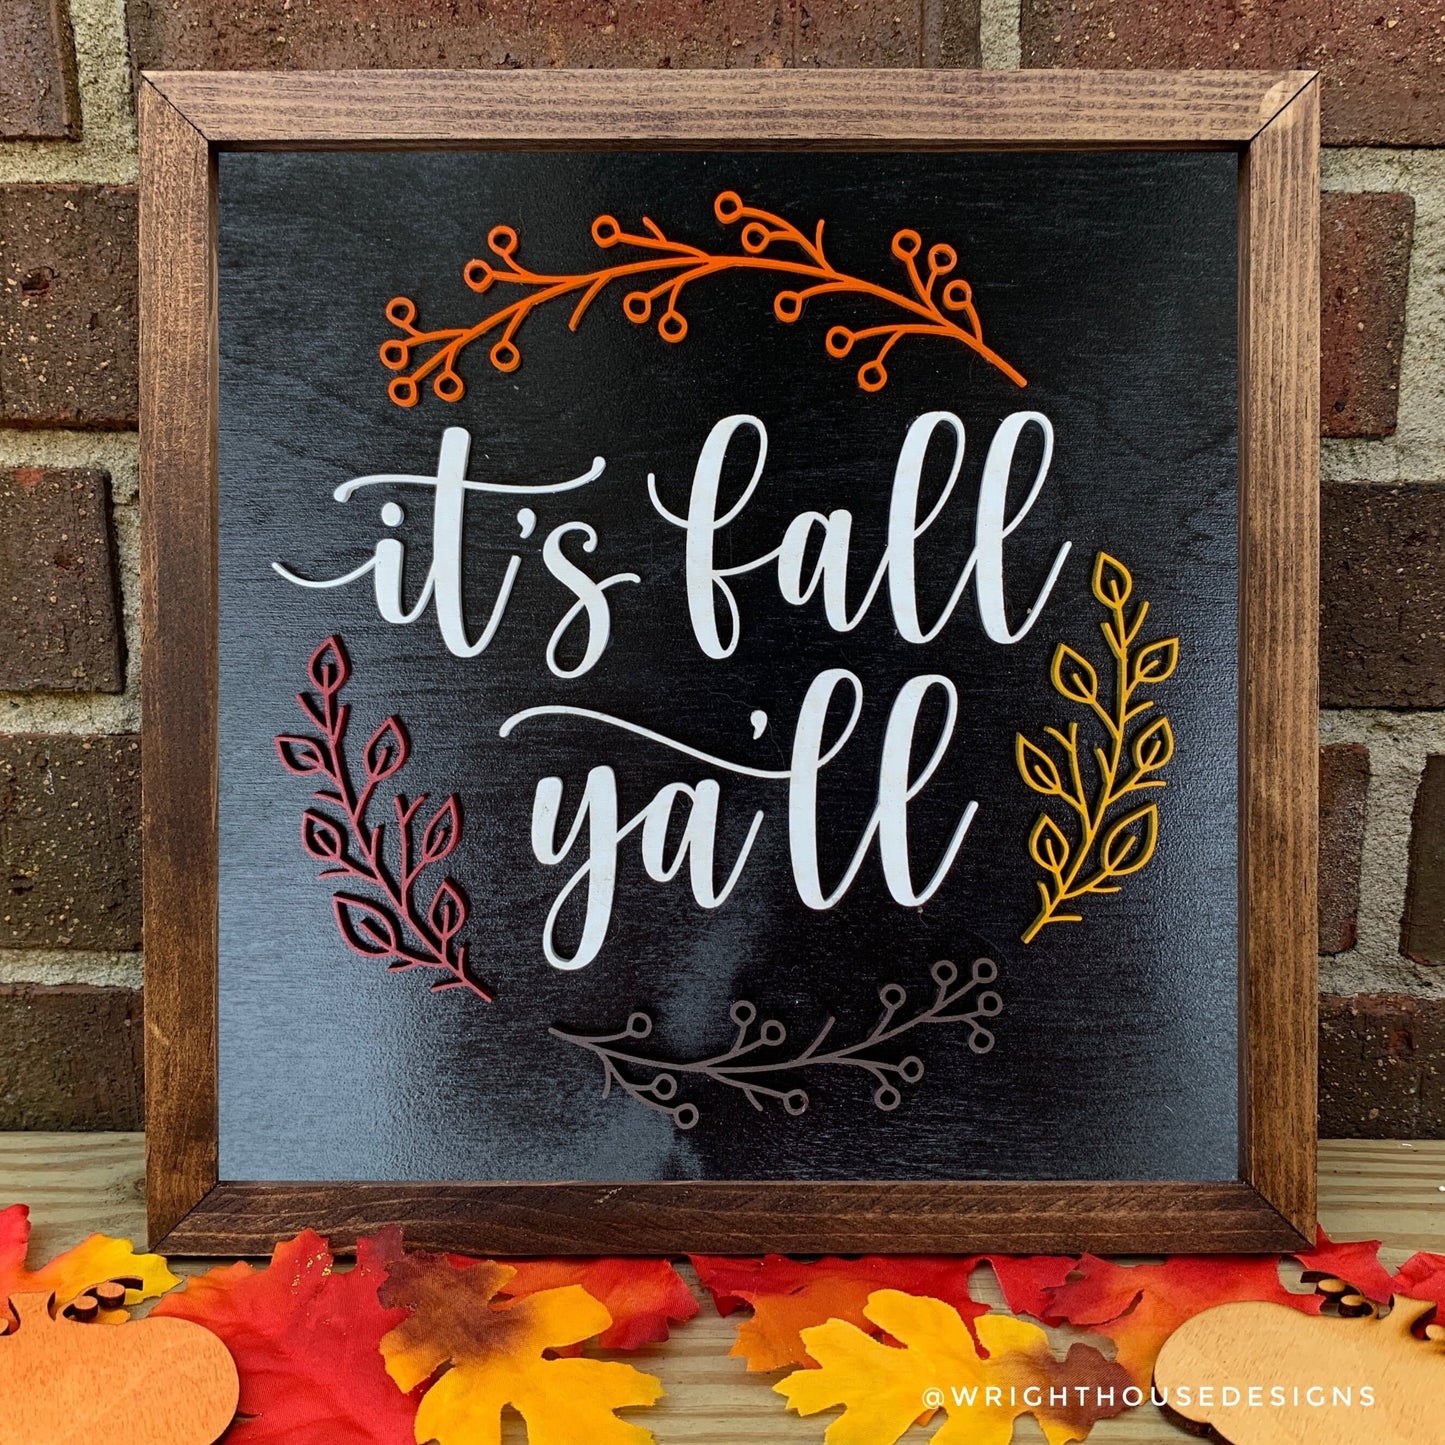 It's Fall Y'all - Wooden Coffee Bar Sign - Autumn Cottagecore Home and Kitchen Decor - Console Table Decor - Seasonal Fall Framed Wall Art